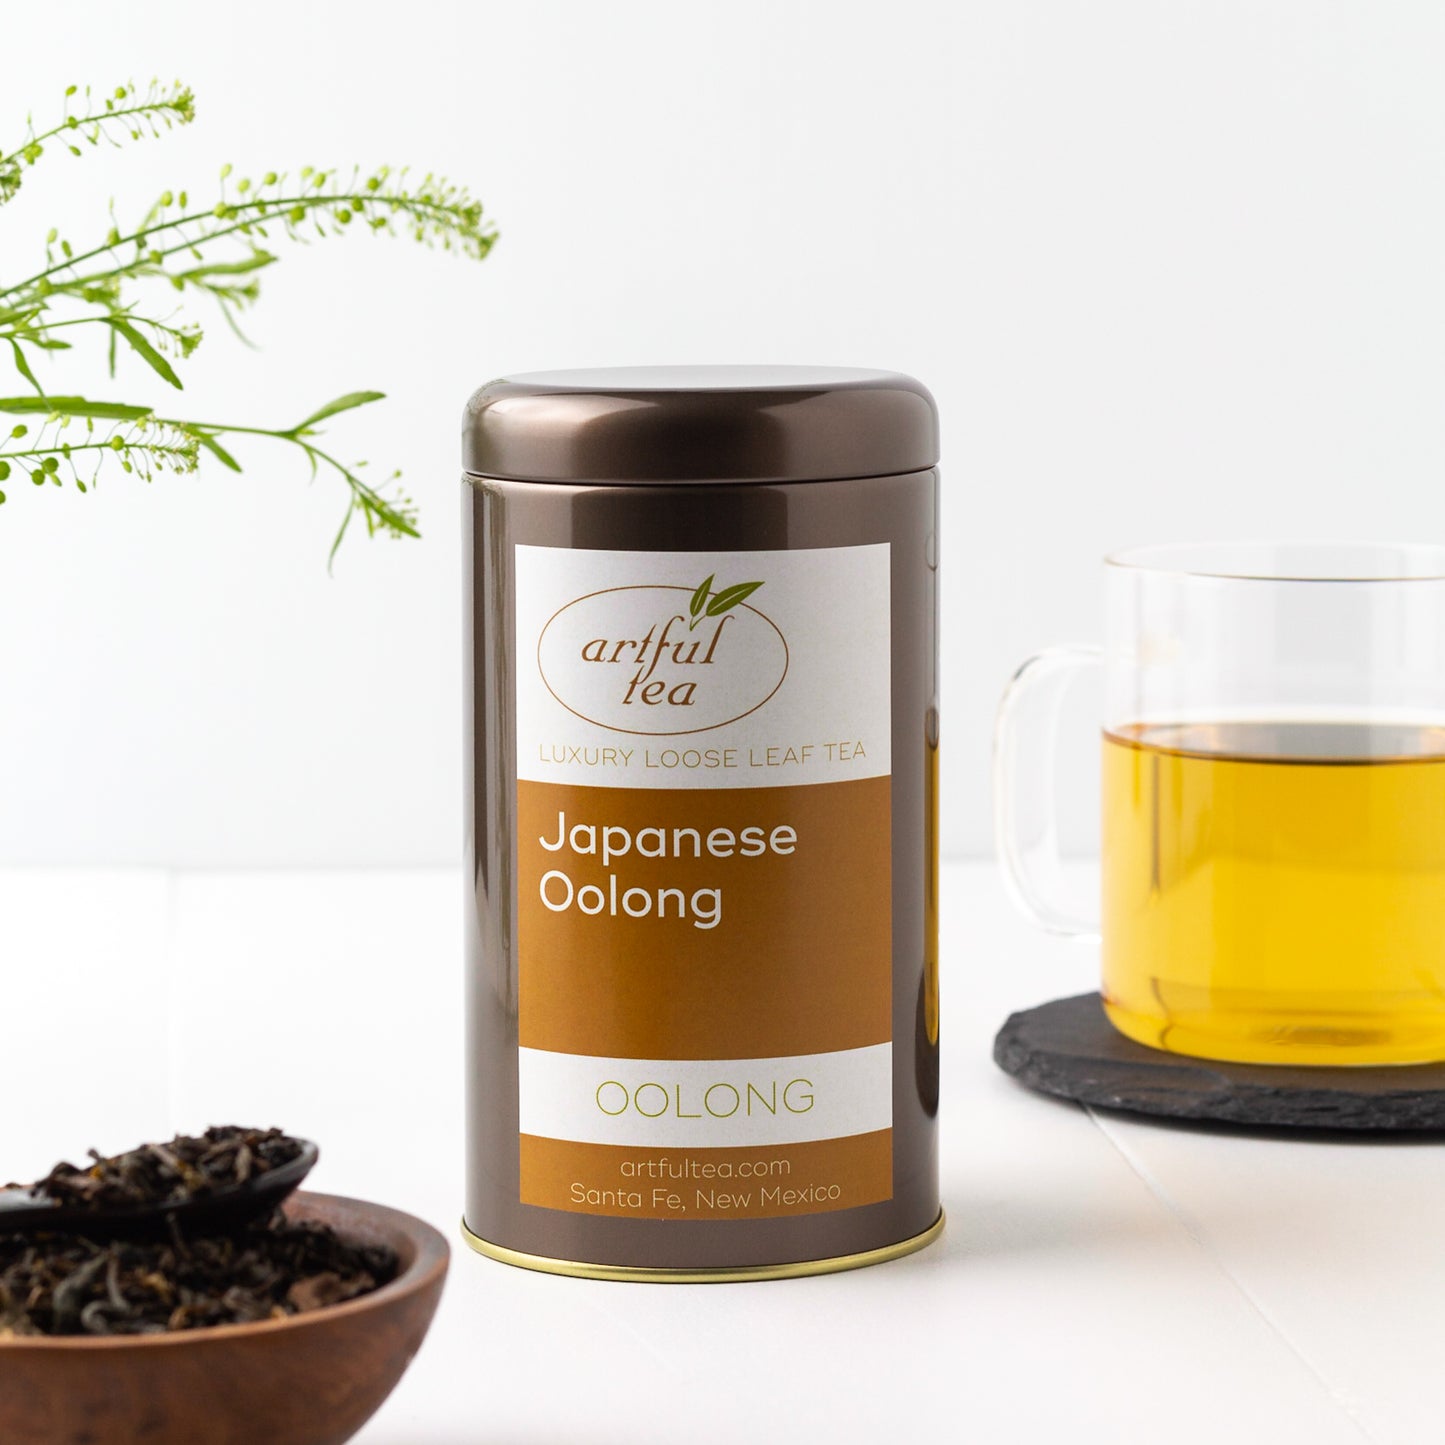 Japanese Oolong Tea shown packaged in a brown tin, with a glass mug of brewed tea in the background and a small wooden bowl of loose leaf tea in the foreground